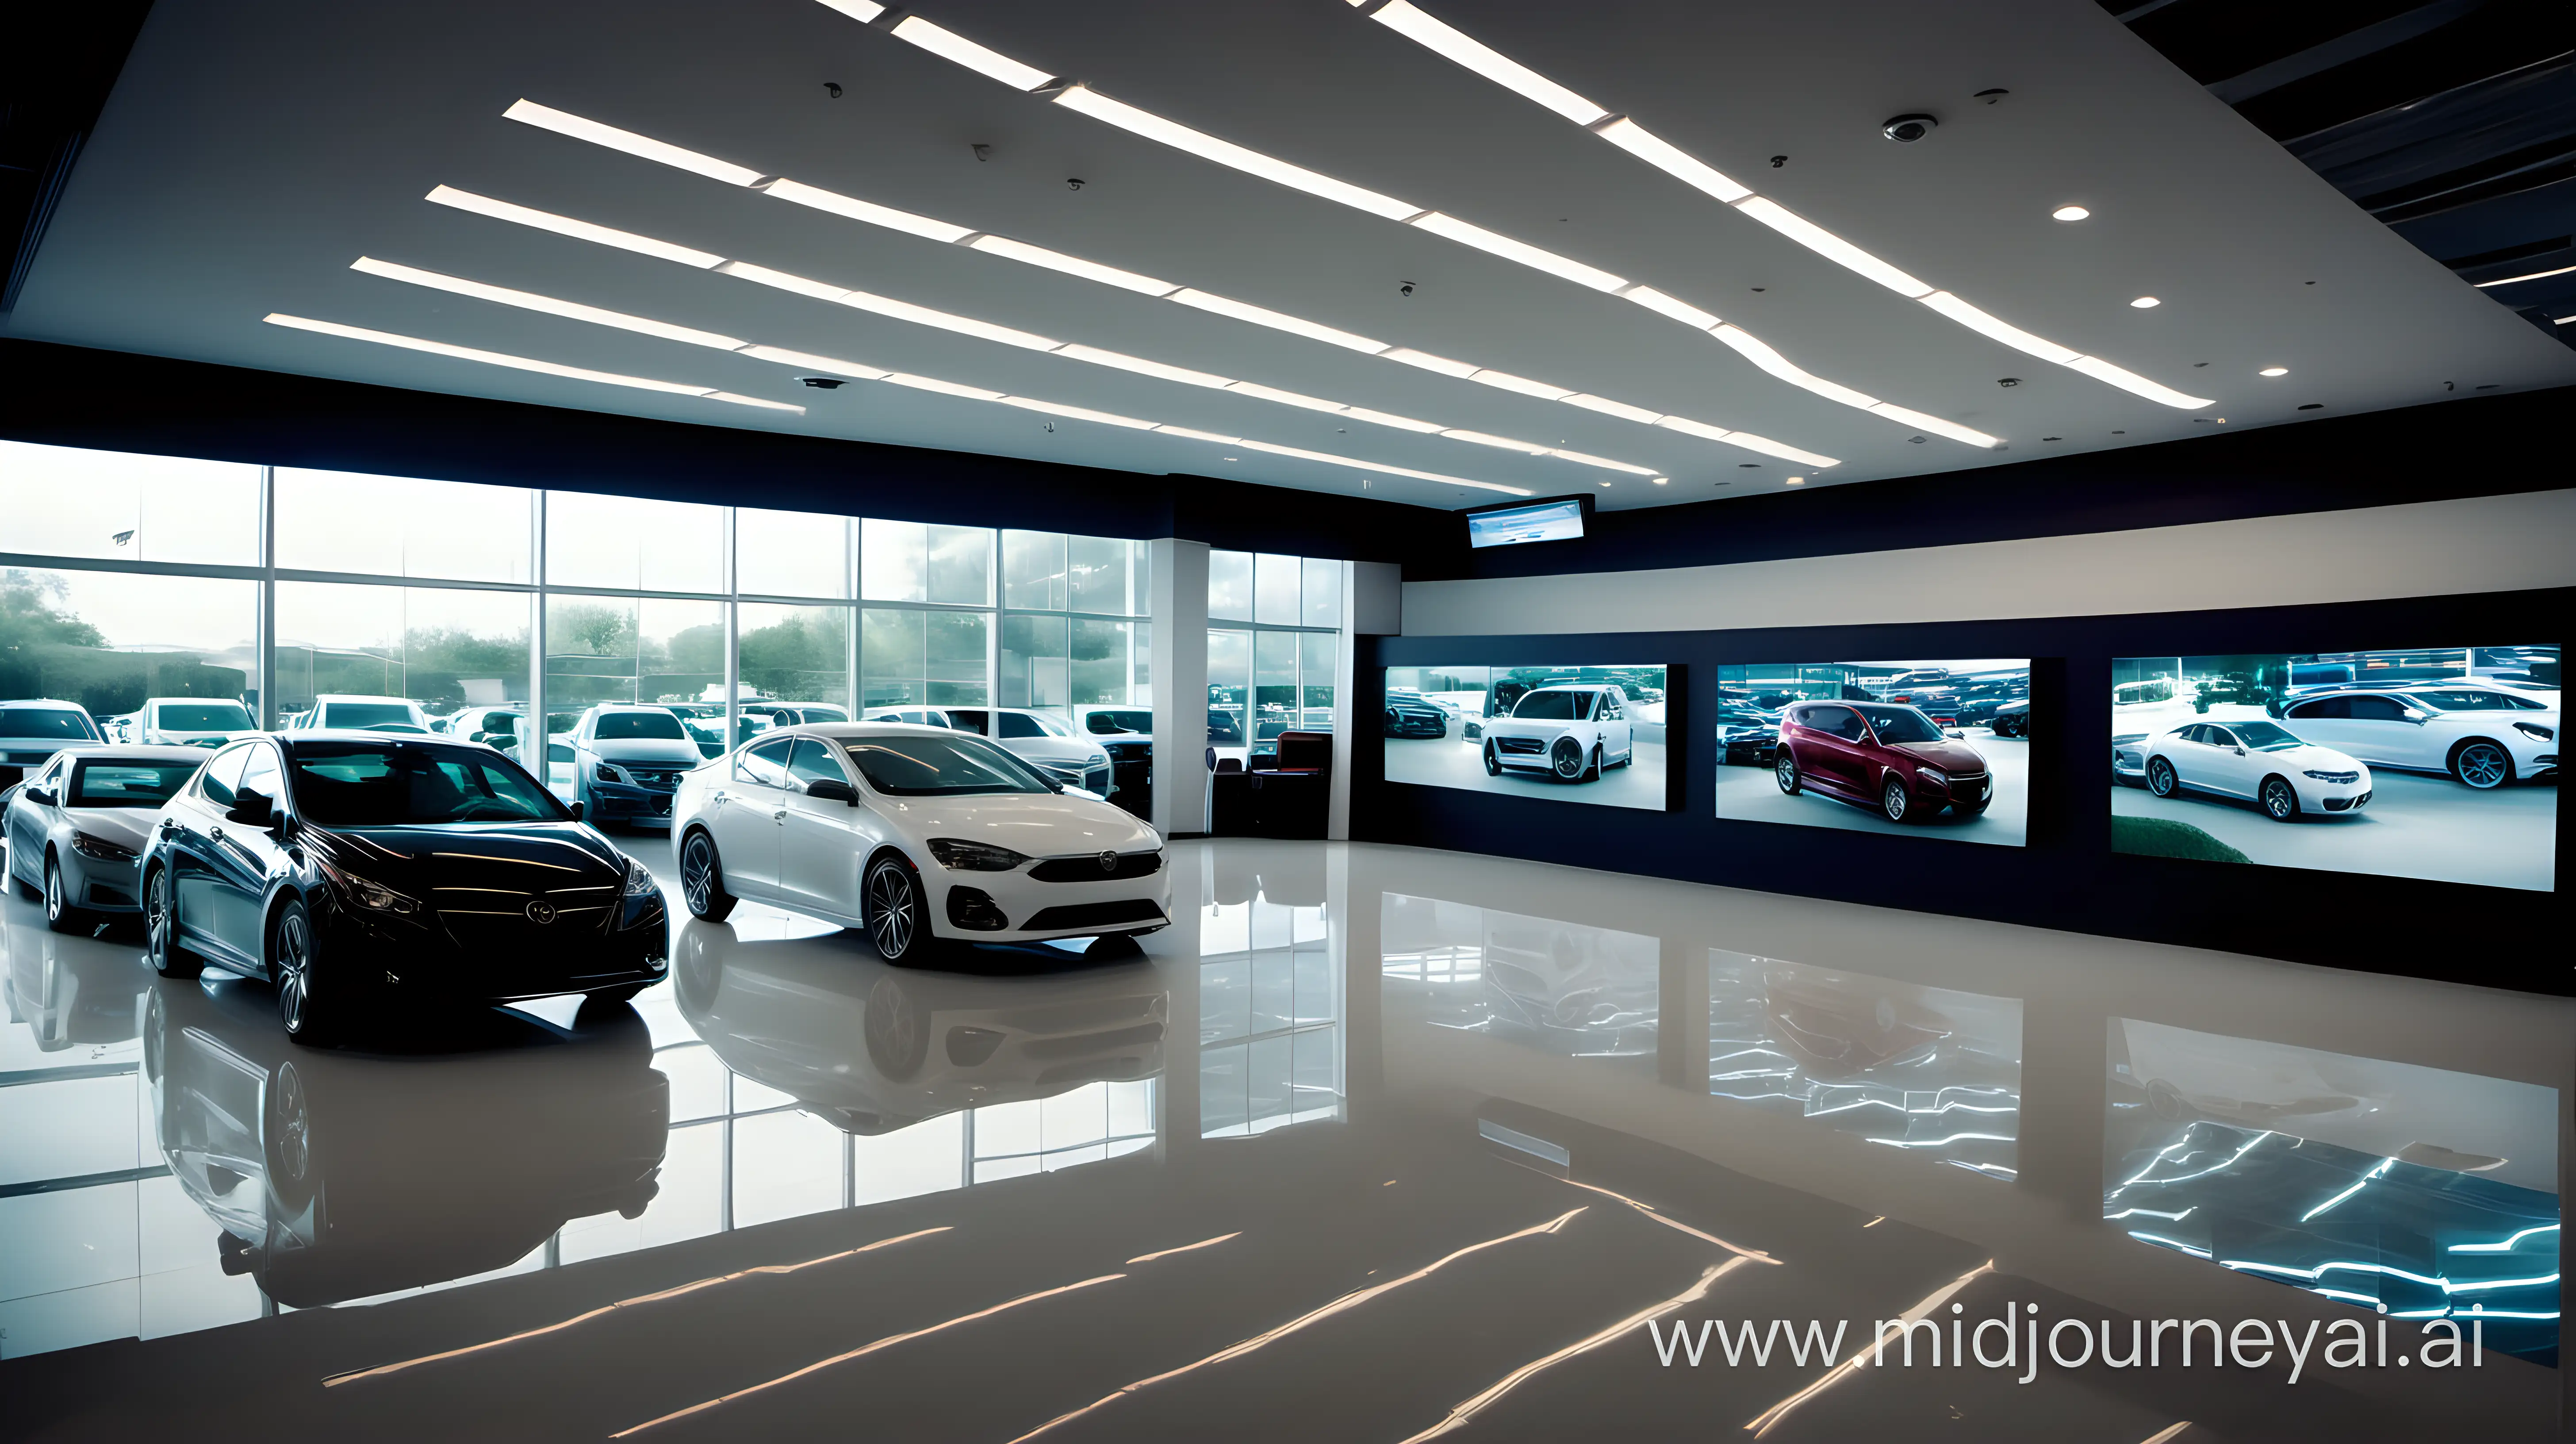 Vibrant Automotive Showroom with Stunning Cars and Cinematic Video Displays